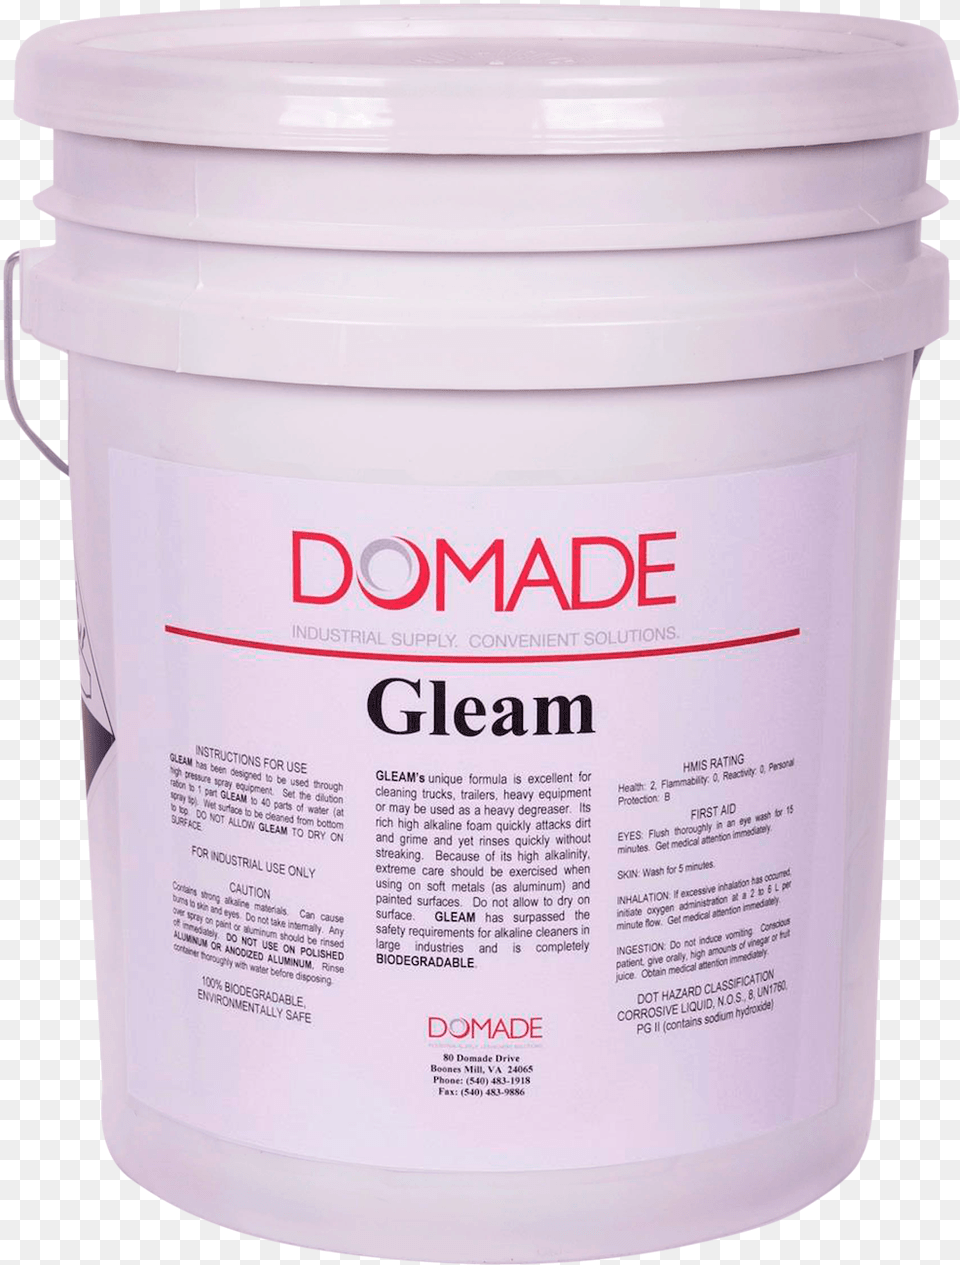 Domade Gleam Hd Alkaline Cleanerdegreaser 6 Gal Plastic, Paint Container, Bucket Free Png Download